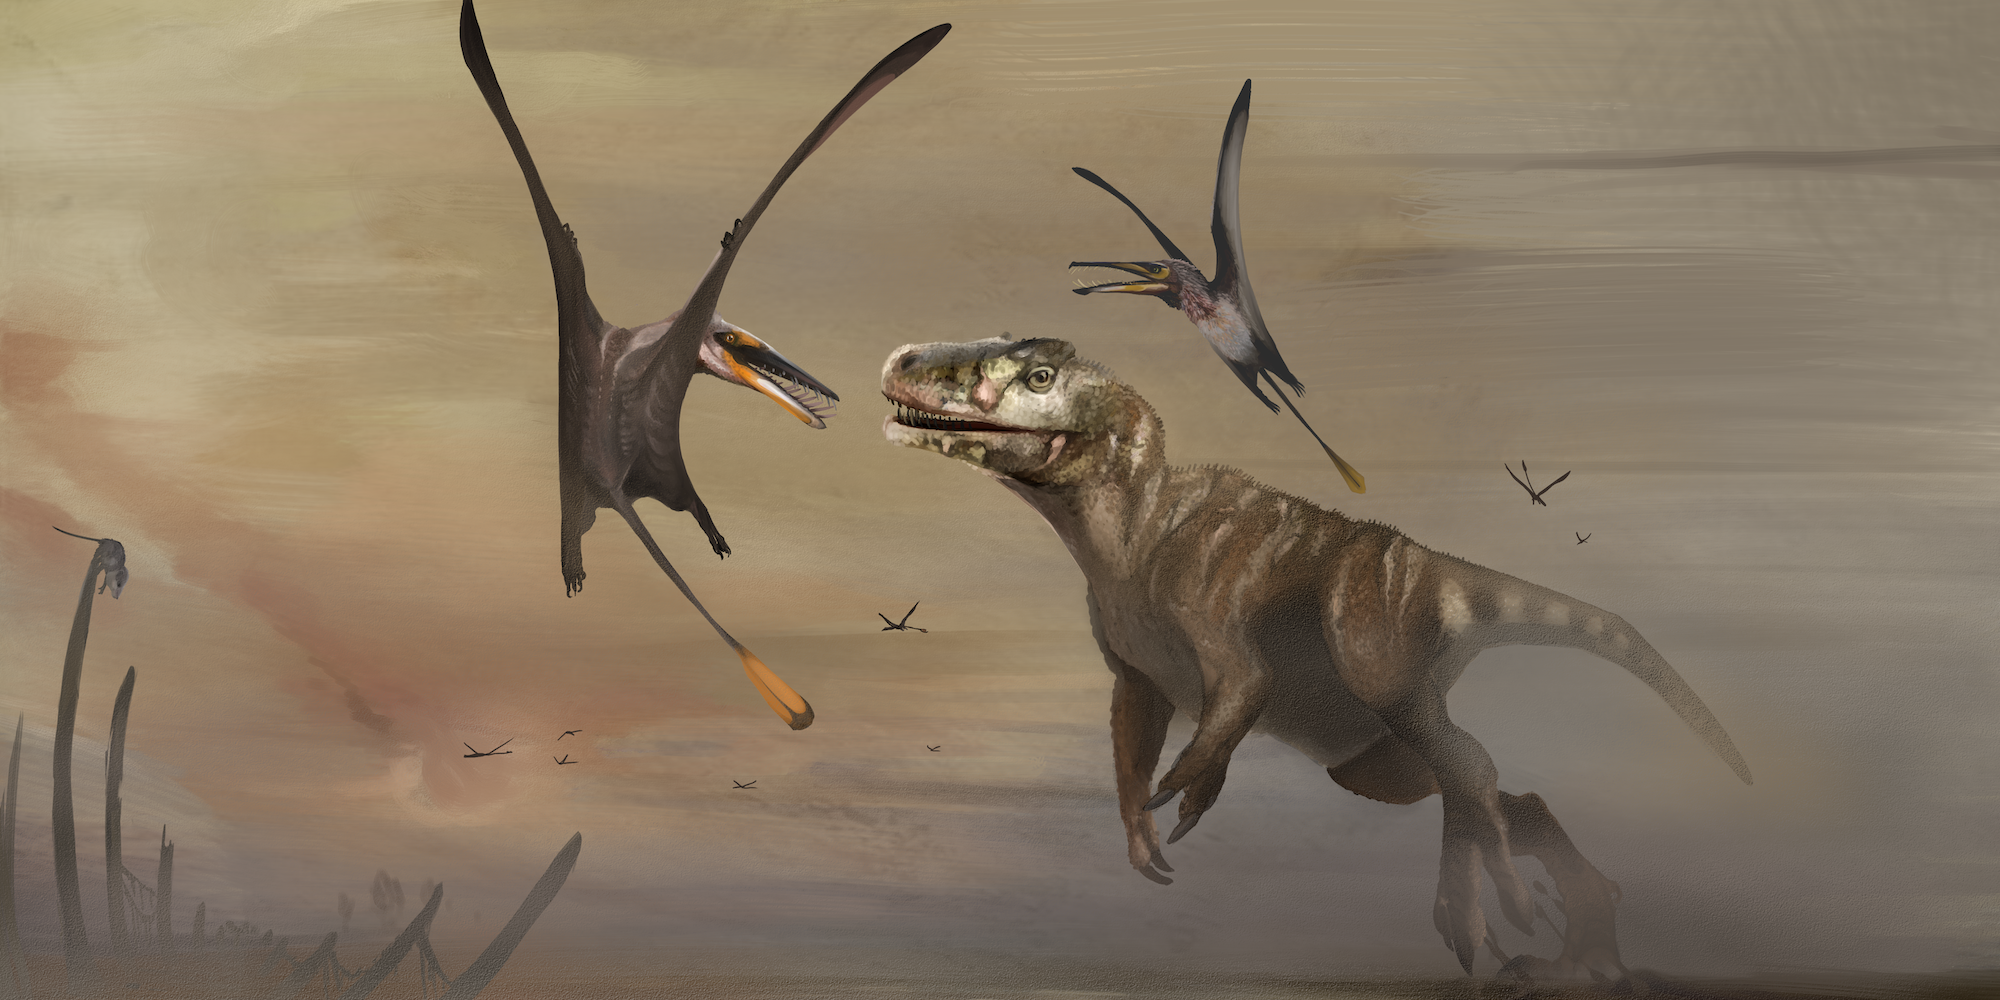 An artist representation of two pterosaurs fighting a meat-eating dinosaur in the Jurassic peroid.